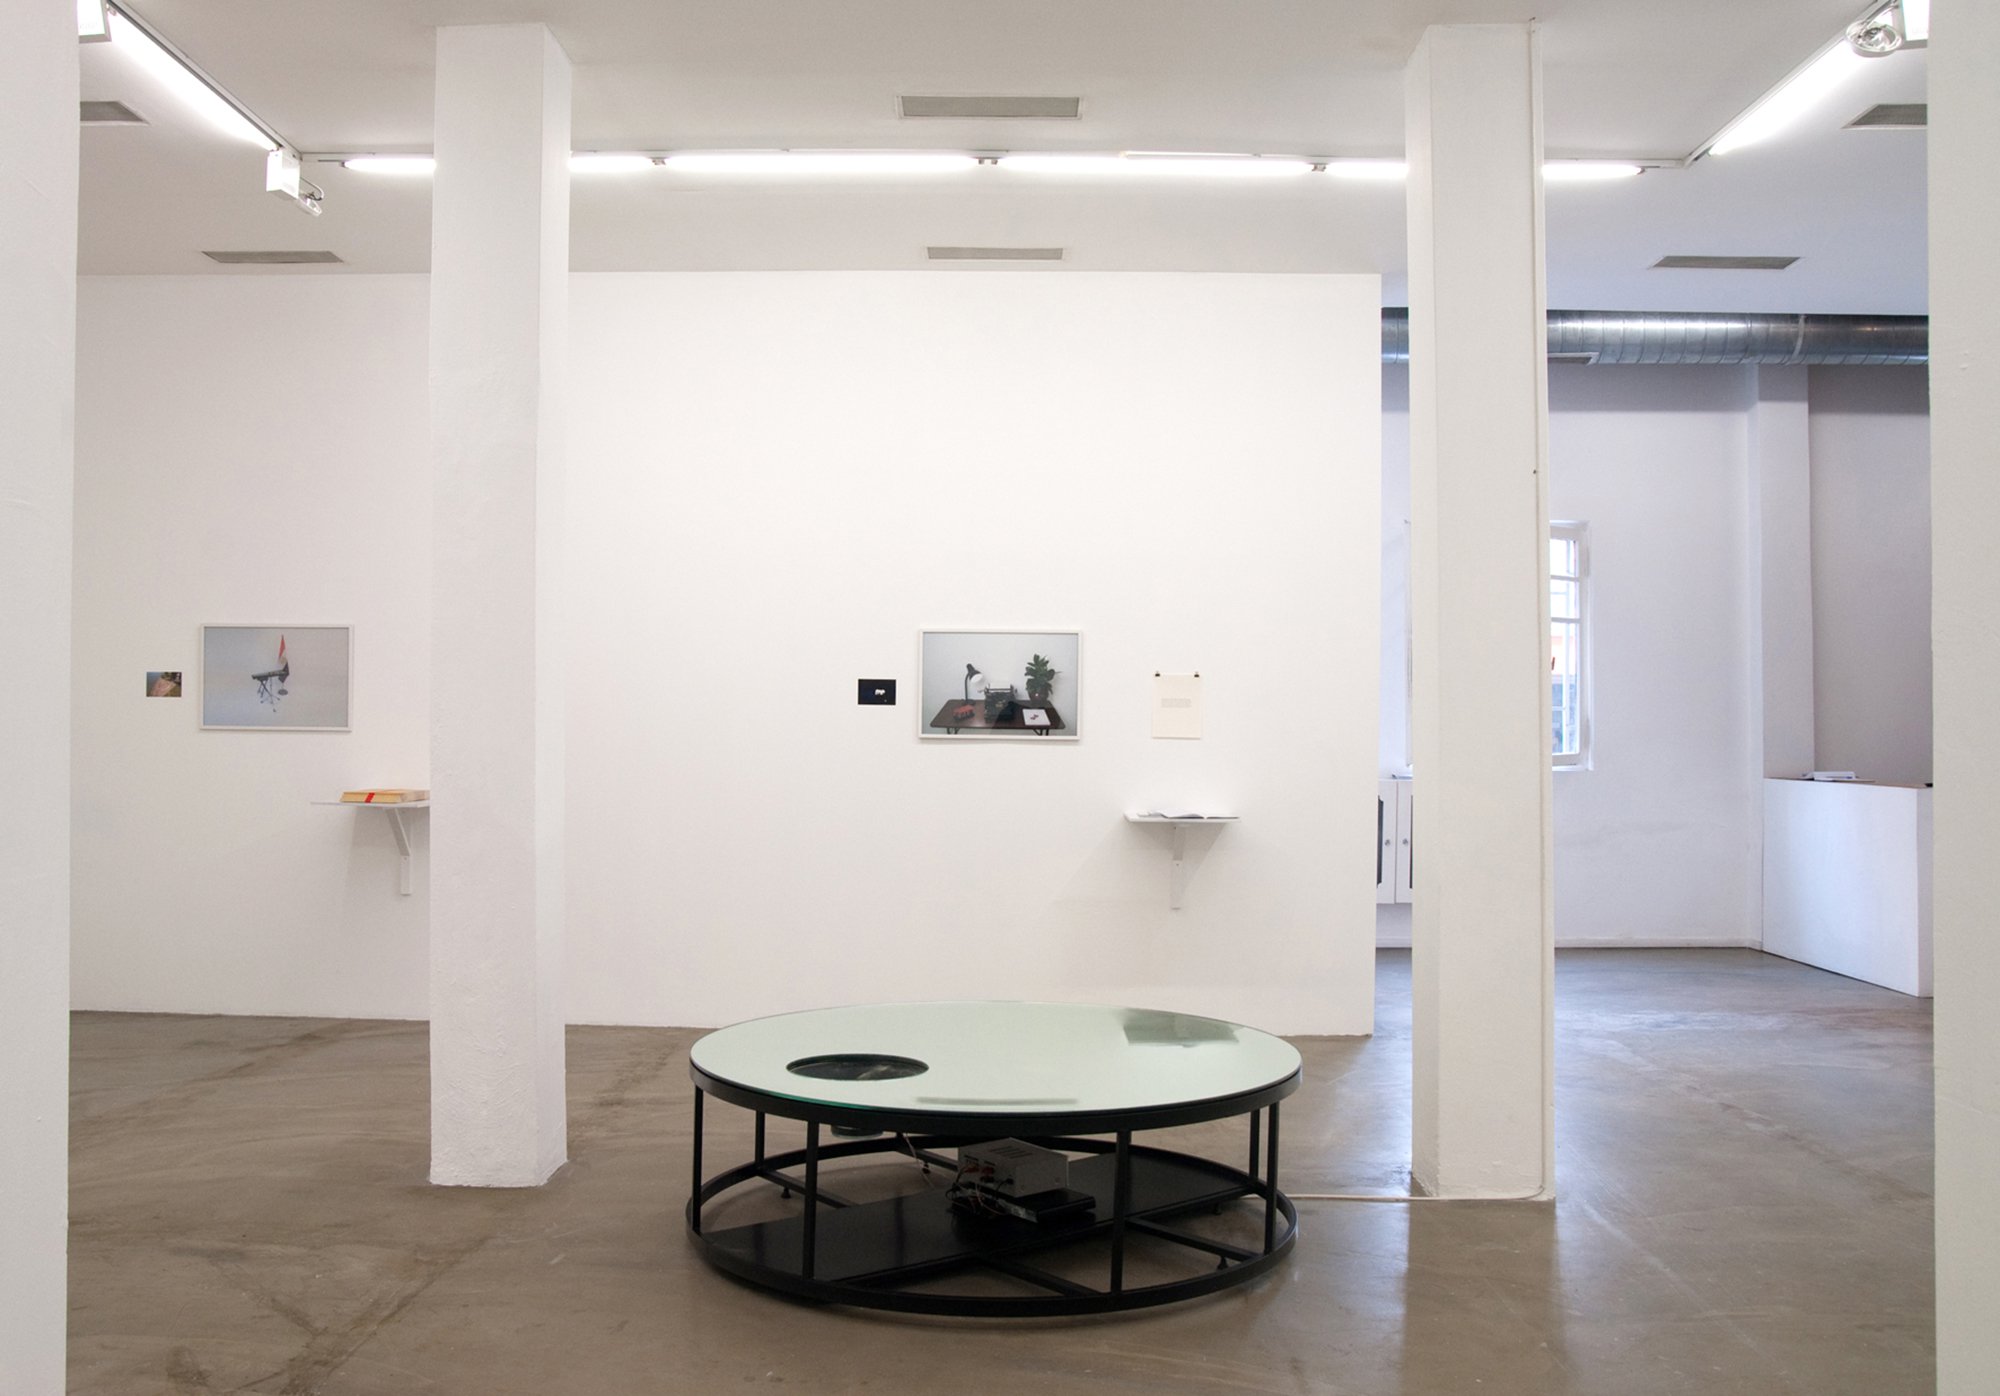 (Centre) Can Altay, Deposit (Spring Deficit: After Dubai, After Hammons and after the politics of white noise), 2010. (On wall) Iman Issa, Triptych #4, photographs, text, notebooks, dimensions variable, 2009. Installation view, Can Atlay – Iman Issa, Rodeo, Istanbul, 2010